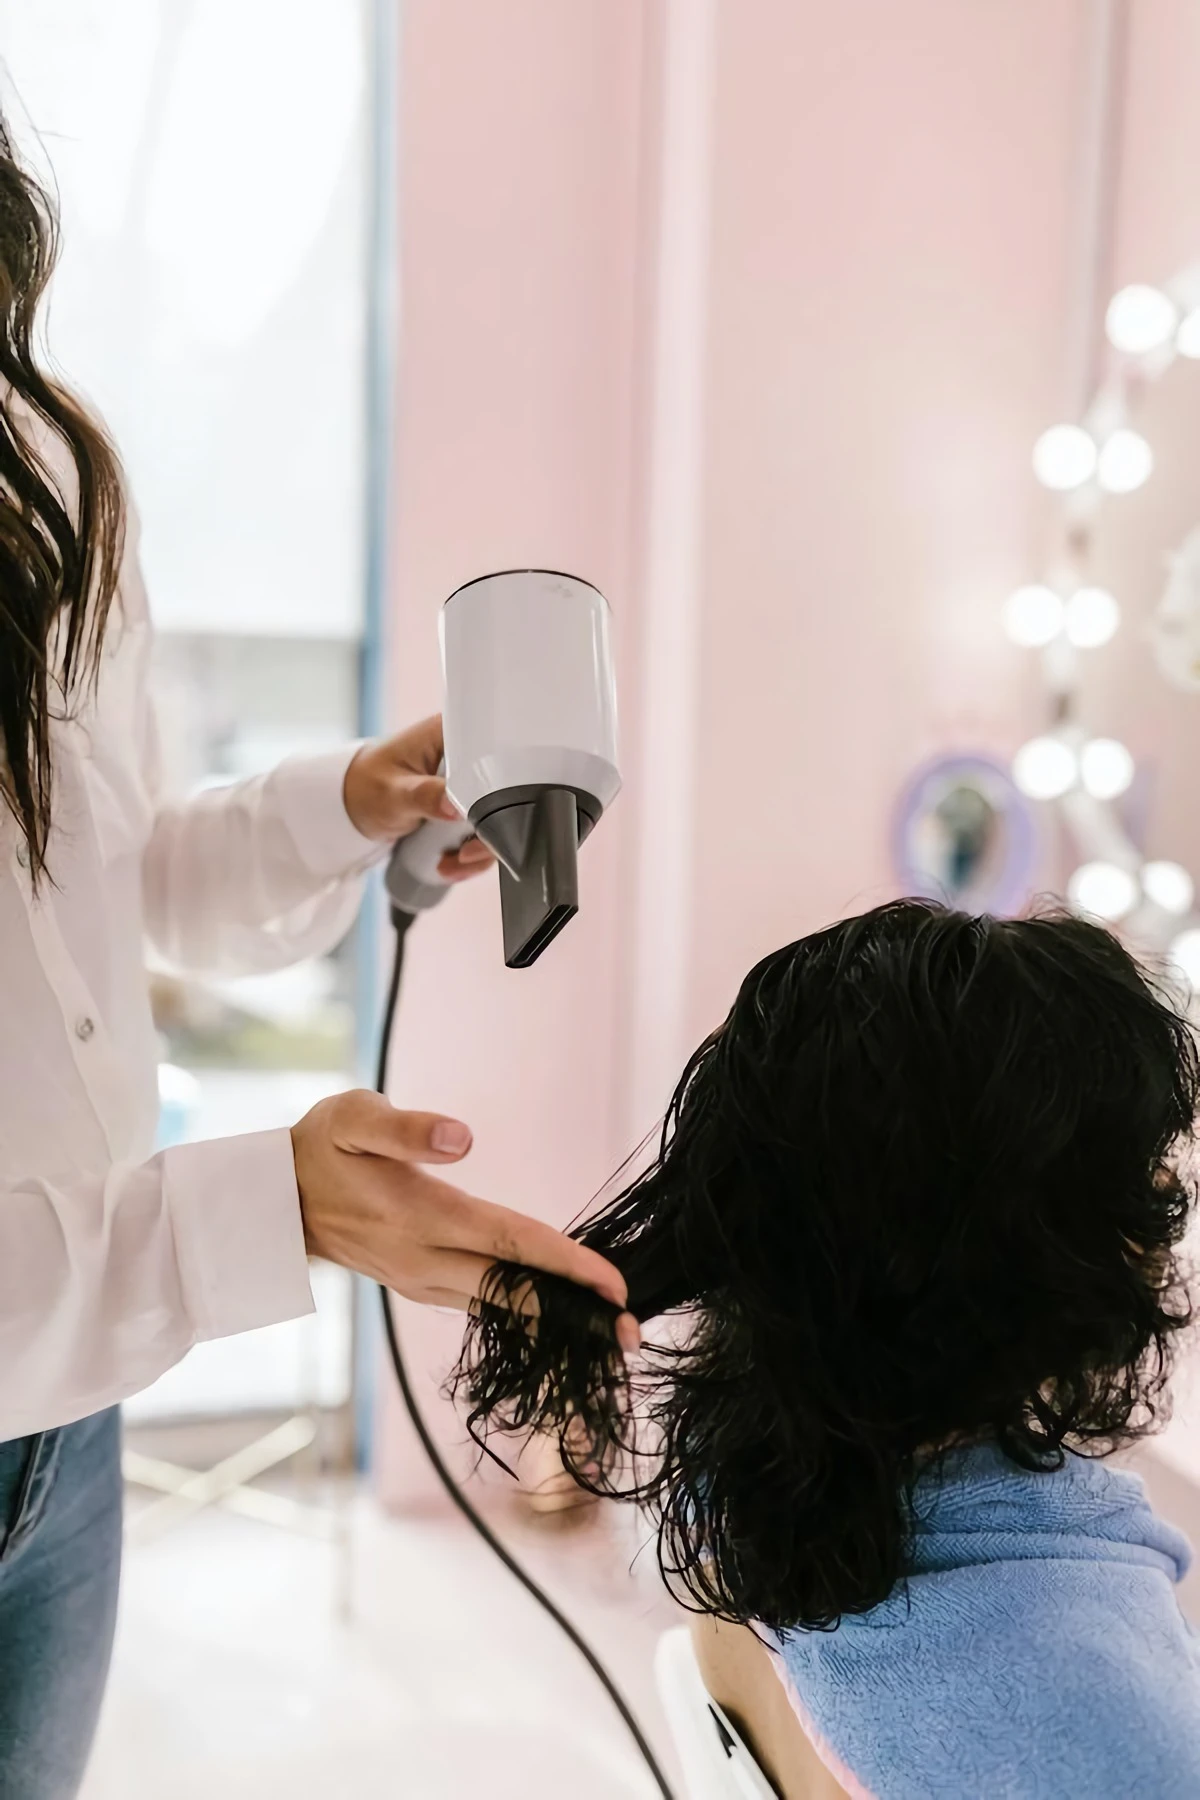 10 Mind-Blowing Hair Dryer Hacks You Never Knew About